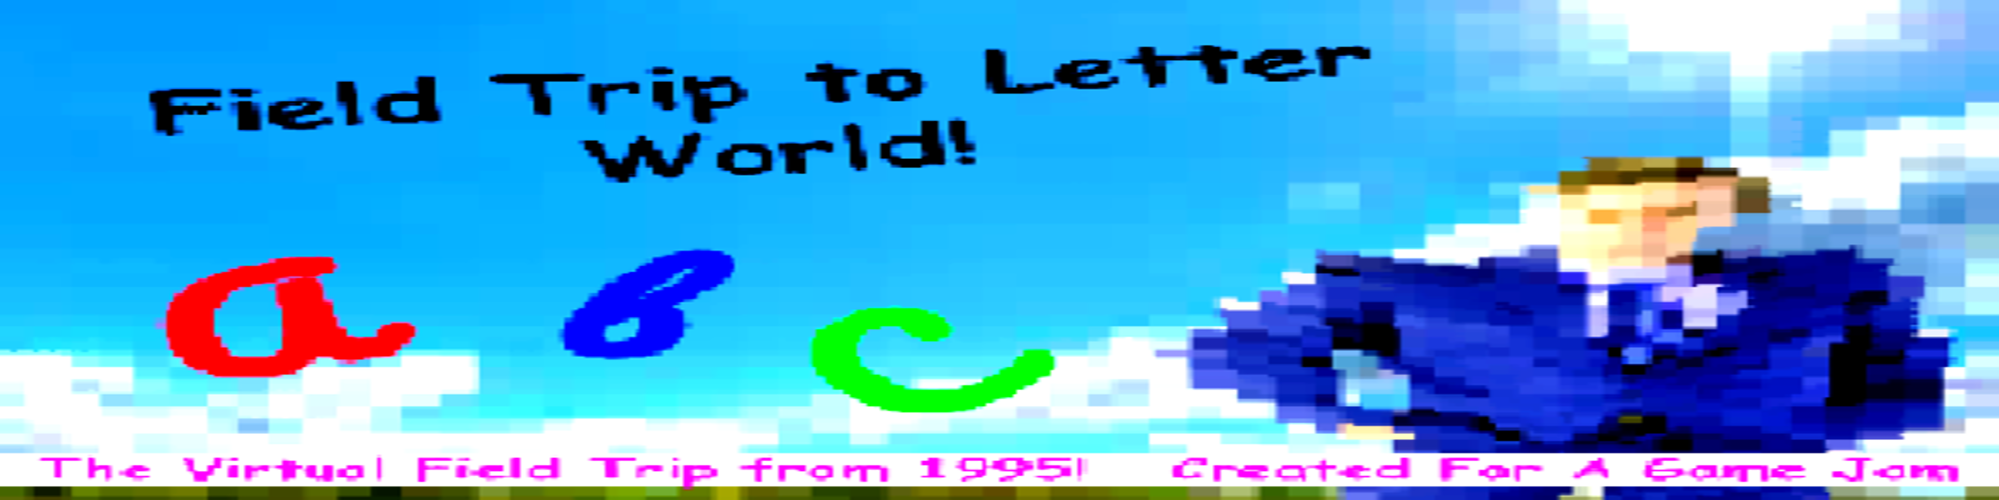 Field Trip to Letter World